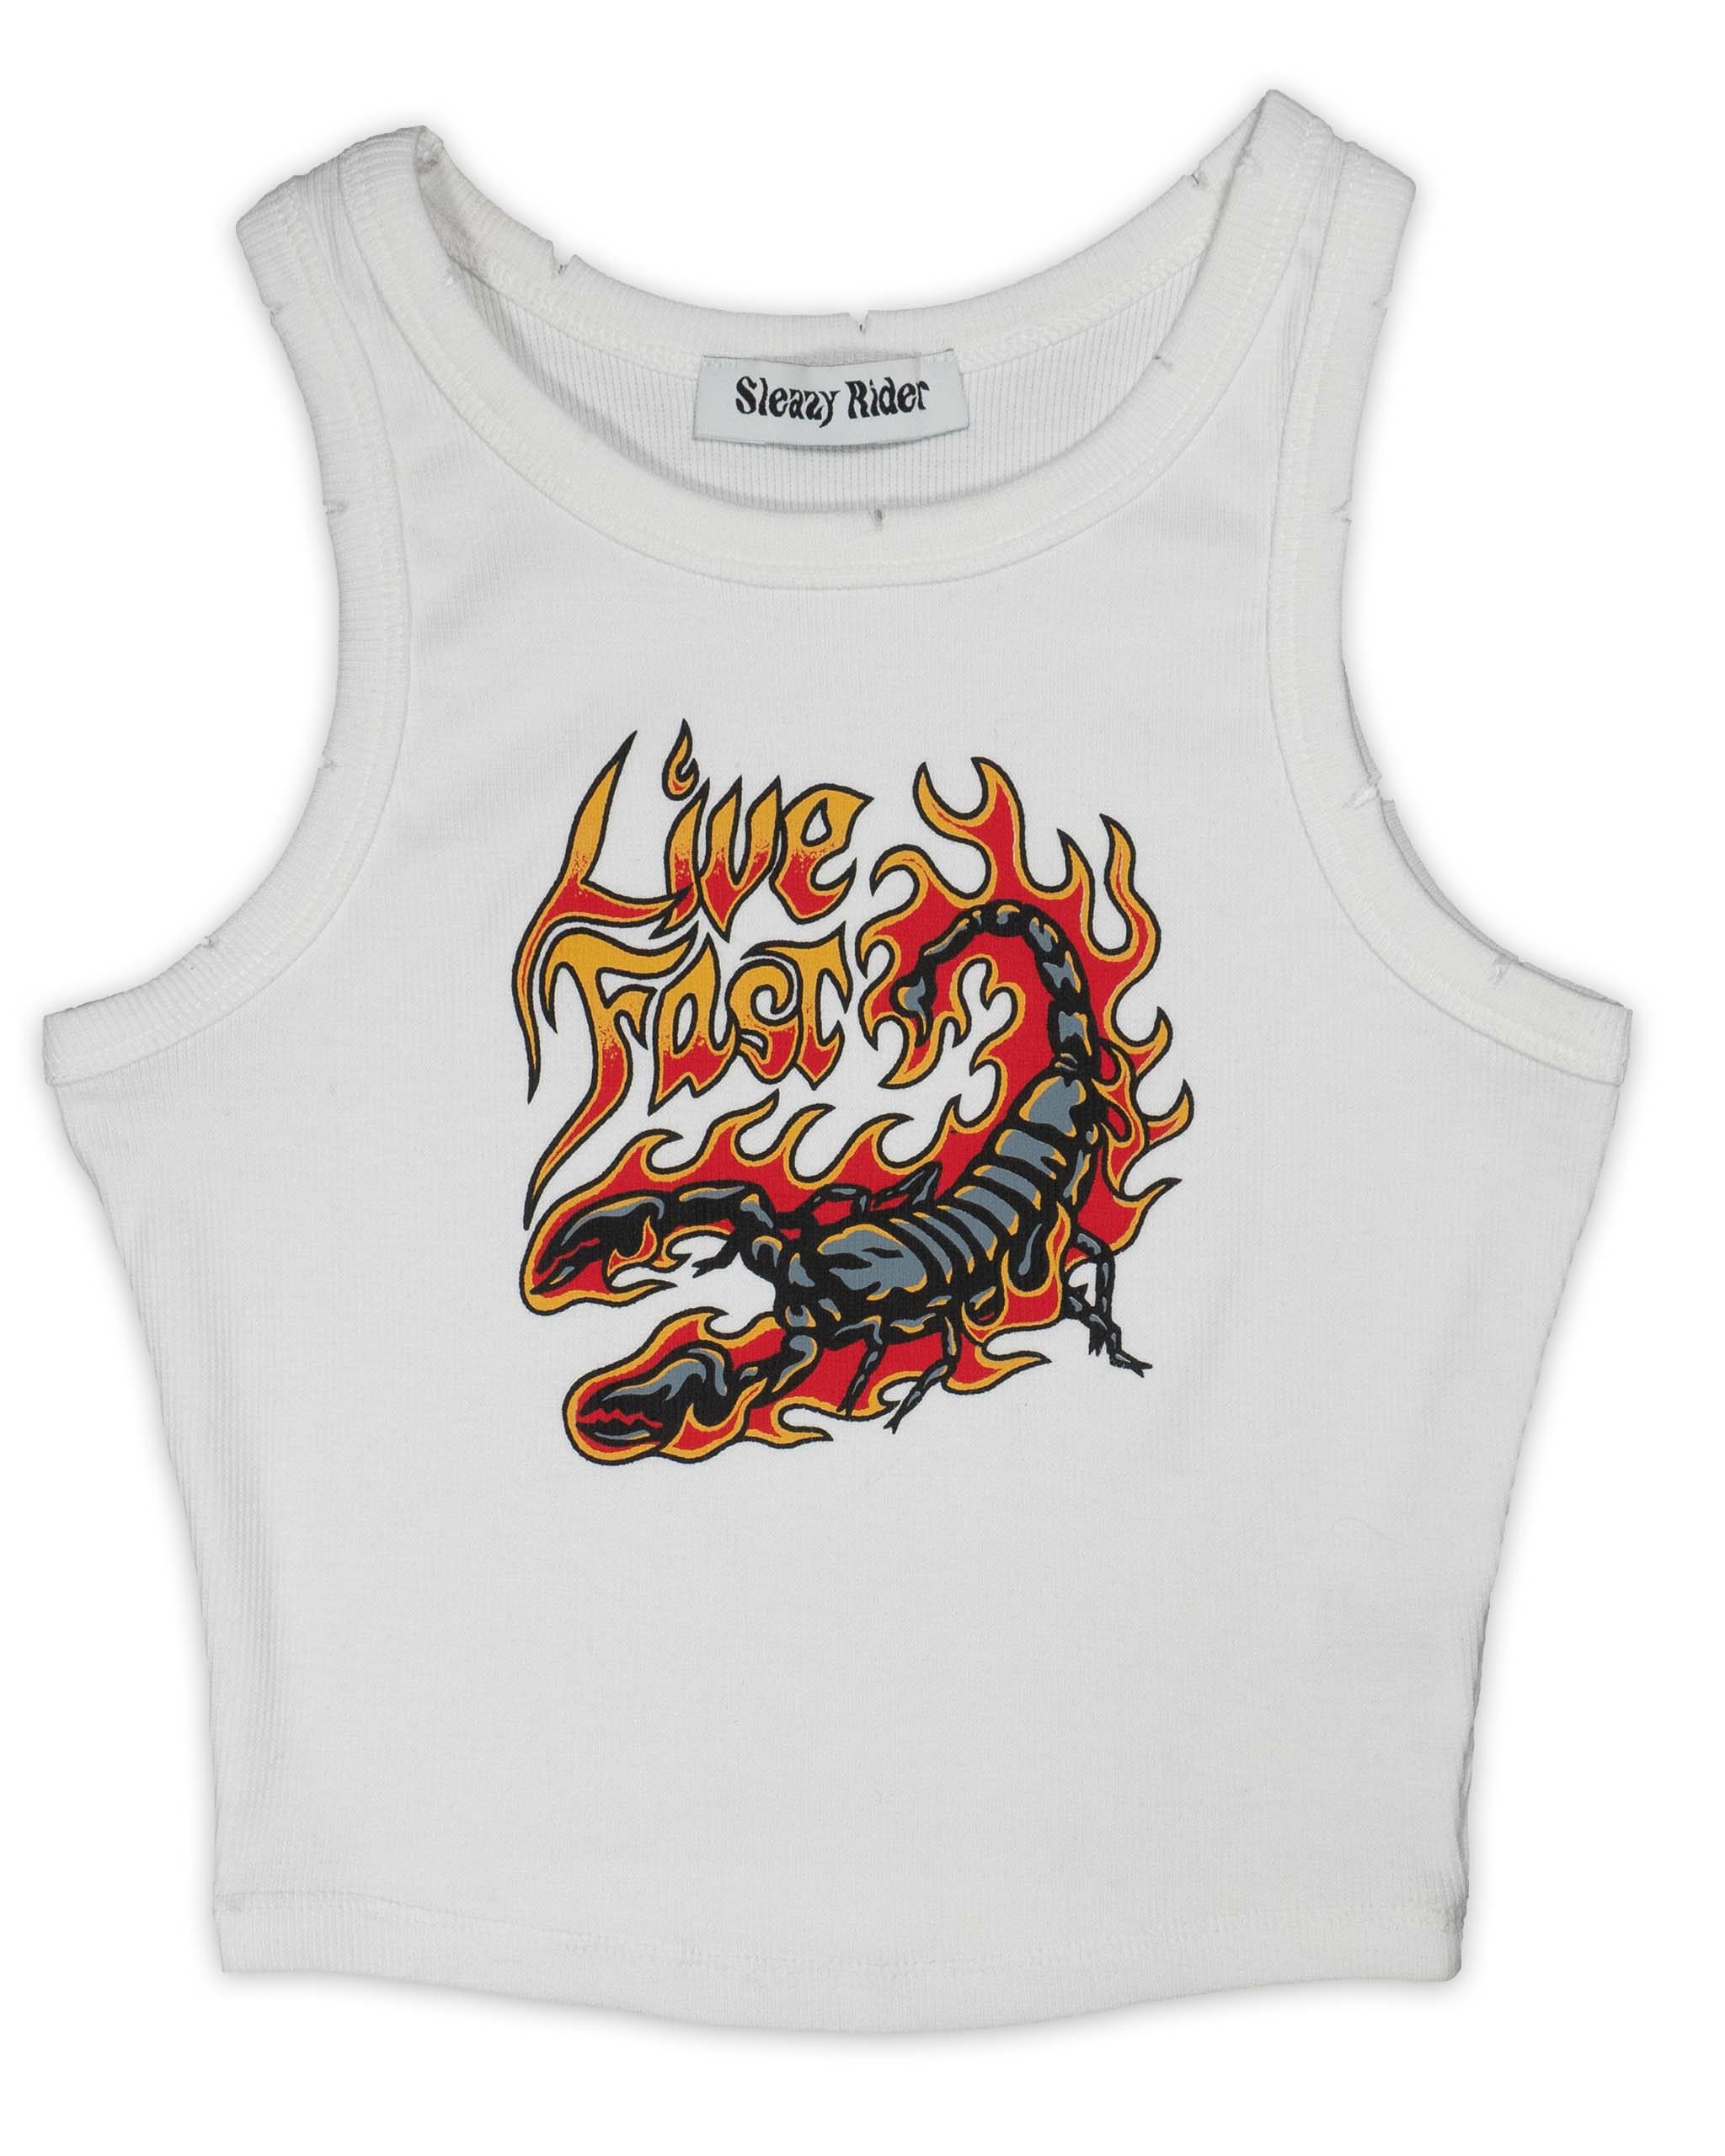 Scorpion tank top by Sleazy Rider